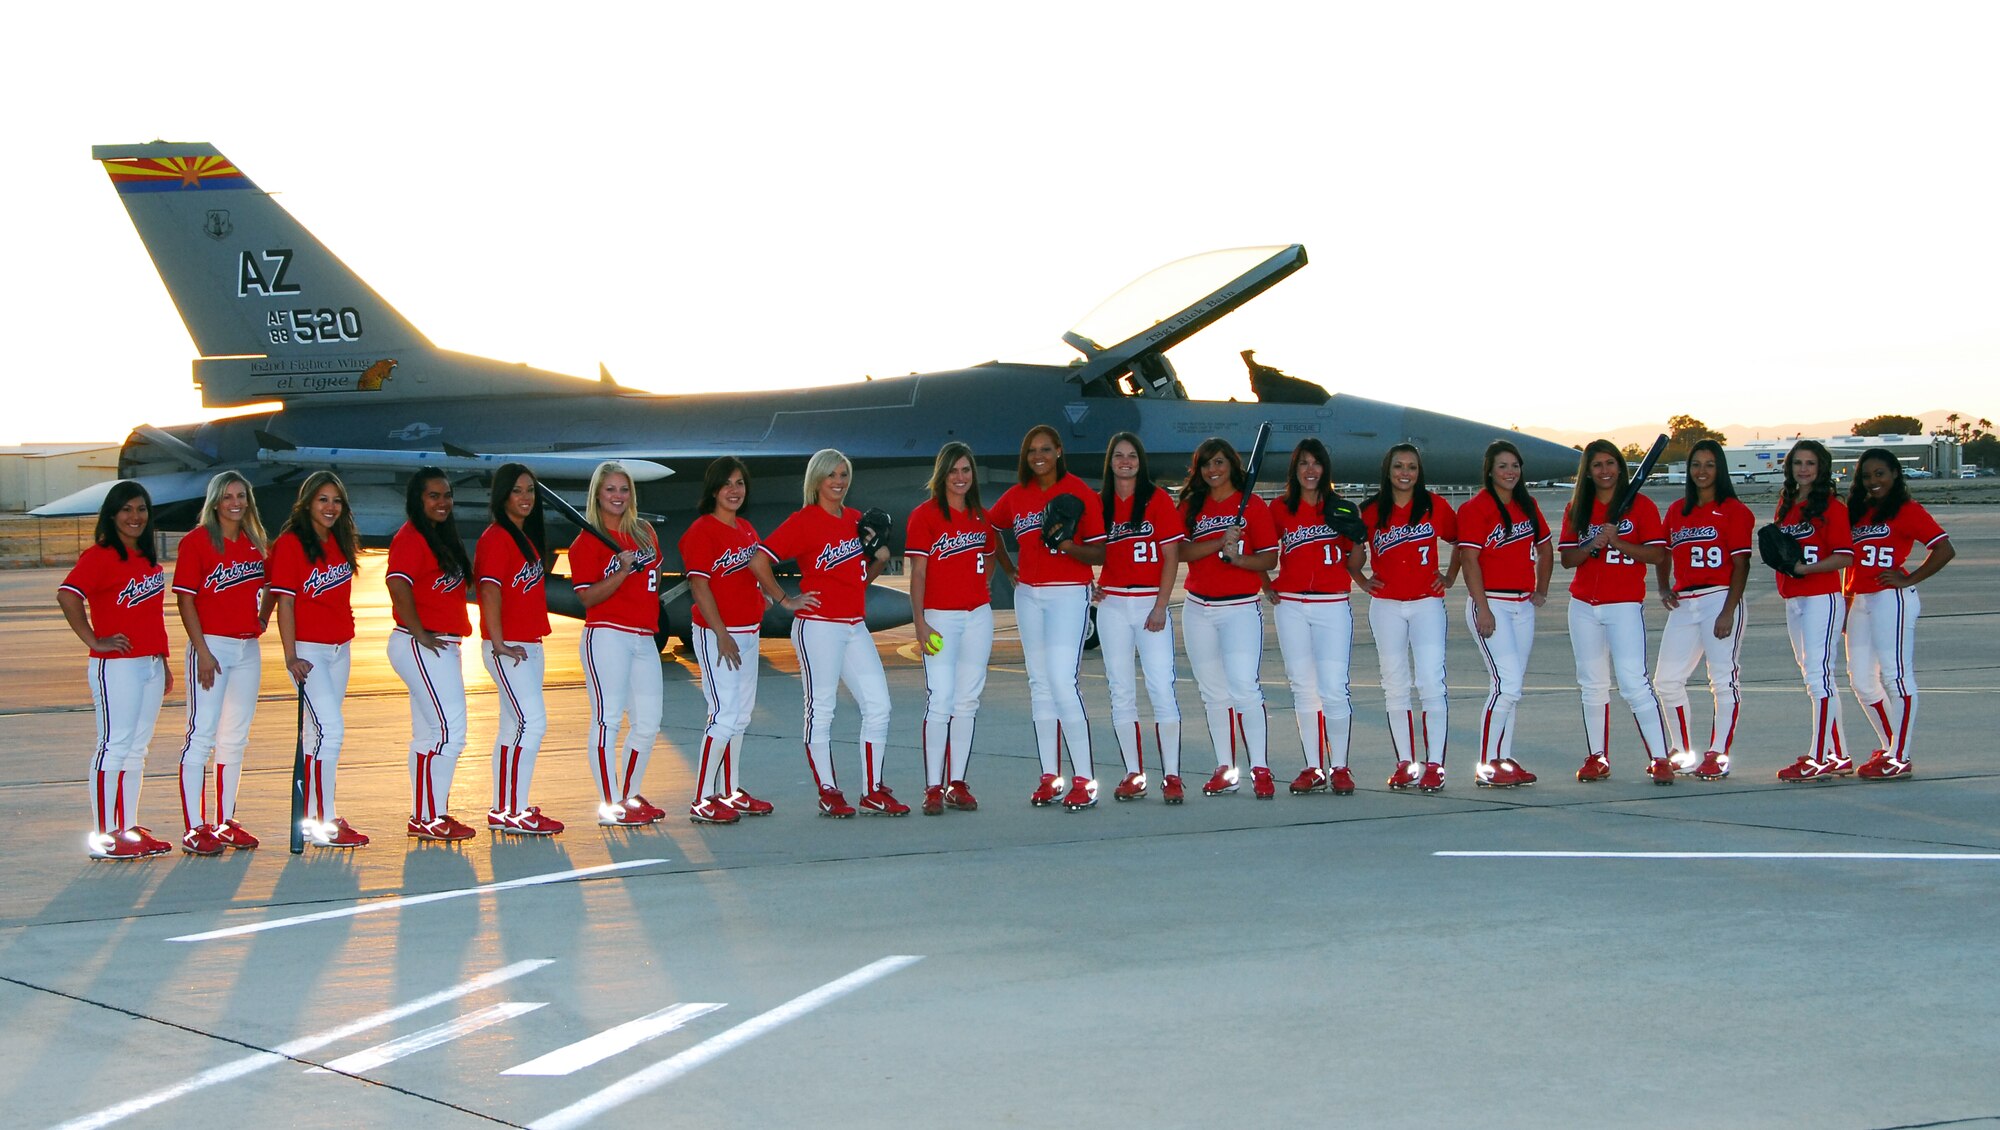 The University of Arizona Softball Team visited the 162nd Fighter Wing of the Arizona Air National Guard Jan. 27 to take photographs for the team’s 2009 season poster. All 19 athletes visited the flightline at Tucson International Airport for a sunrise portrait with an F-16 Fighting Falcon. According to University officials, the posters will be printed by March and will be available free of charge at the Athletic Department offices at McKale Memorial Center. (Air National Guard photo by Master Sgt. Dave Neve)